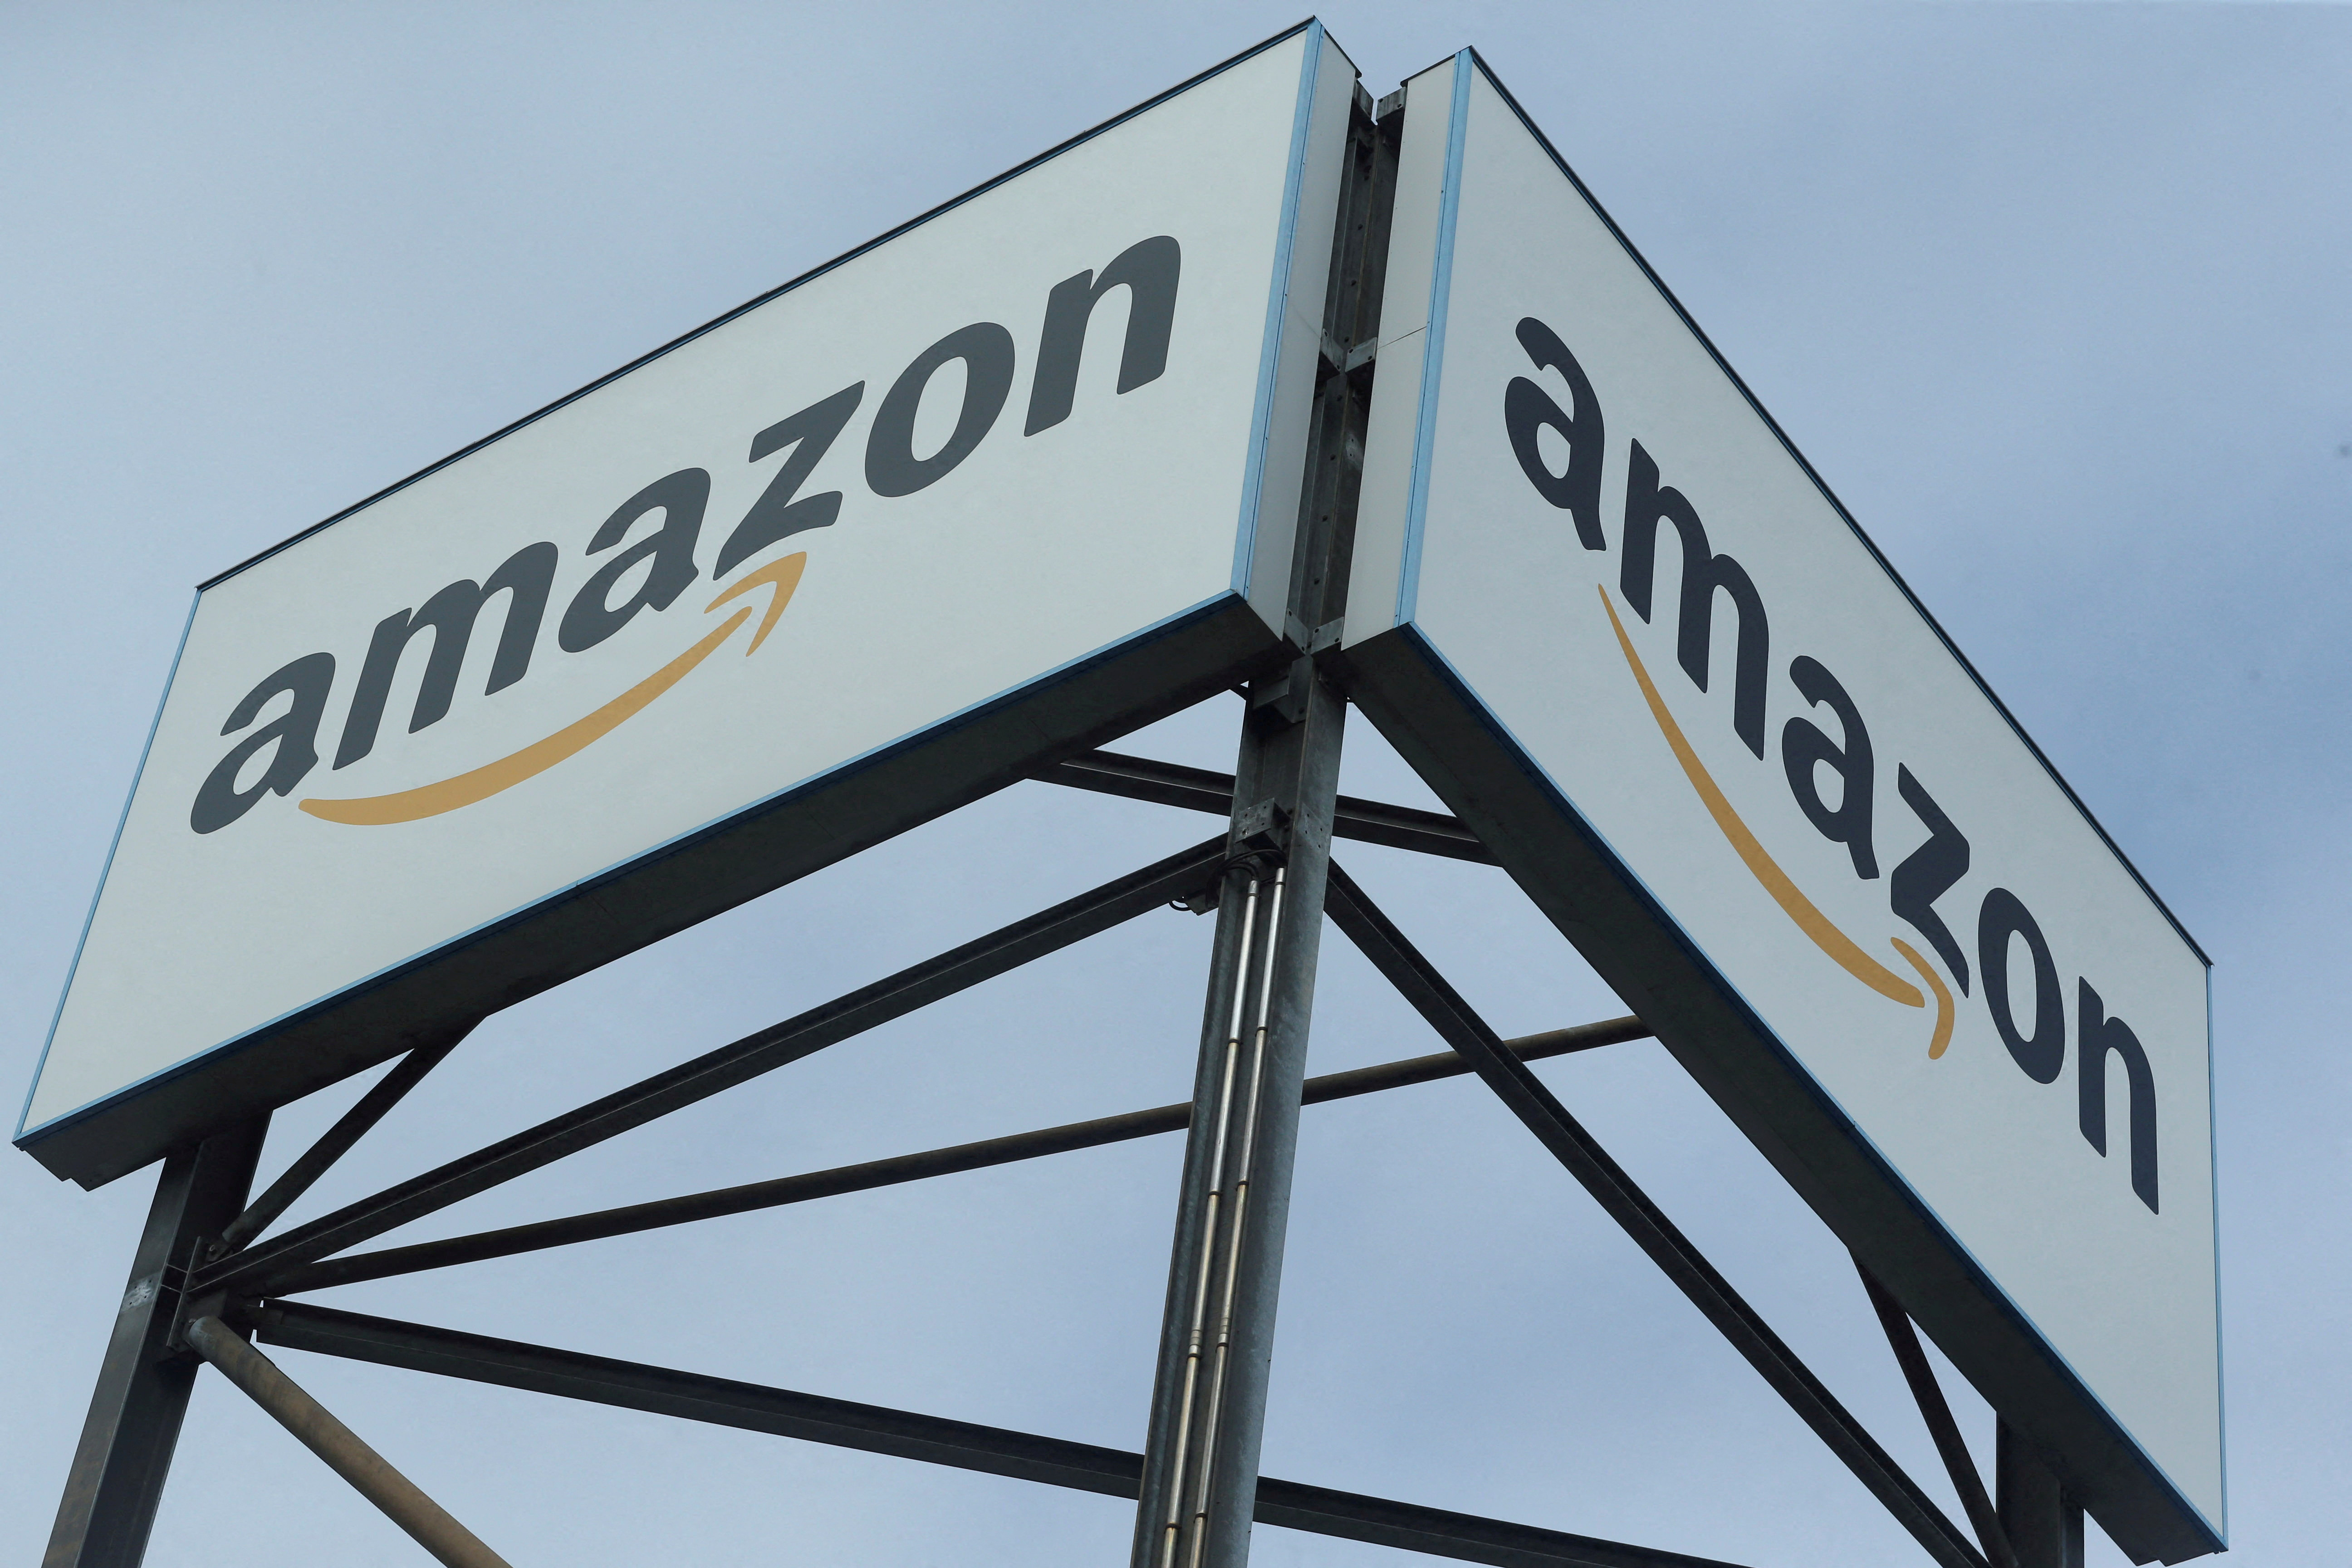 An Amazon logo is pictured at a logistics centre in Mannheim